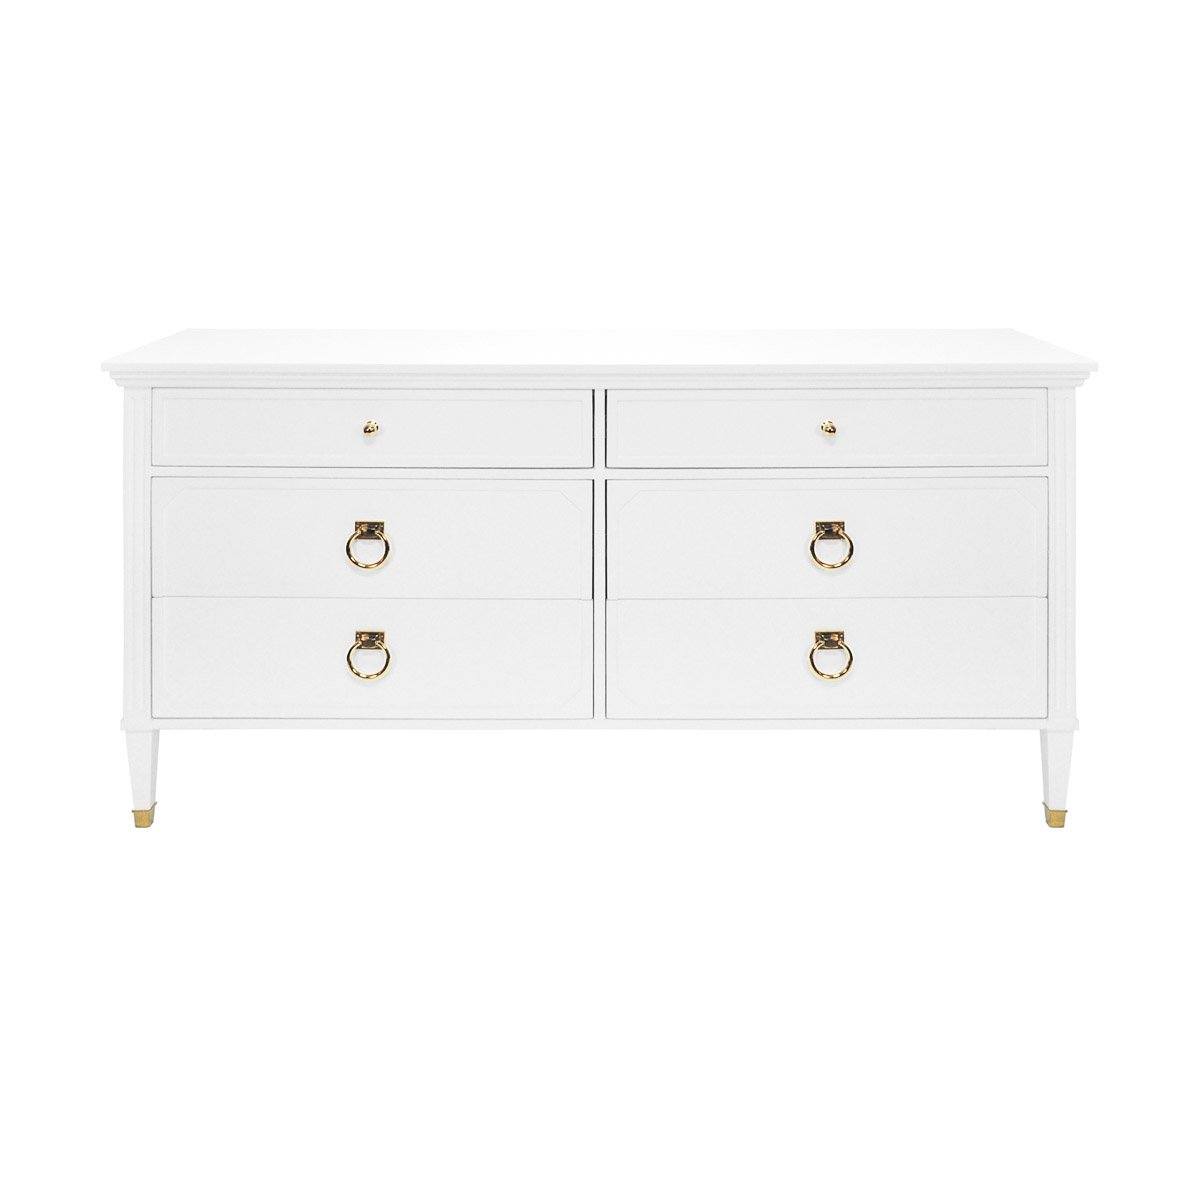 Mark Dresser Glossy White Lacquer | Polished Brass. Front view.